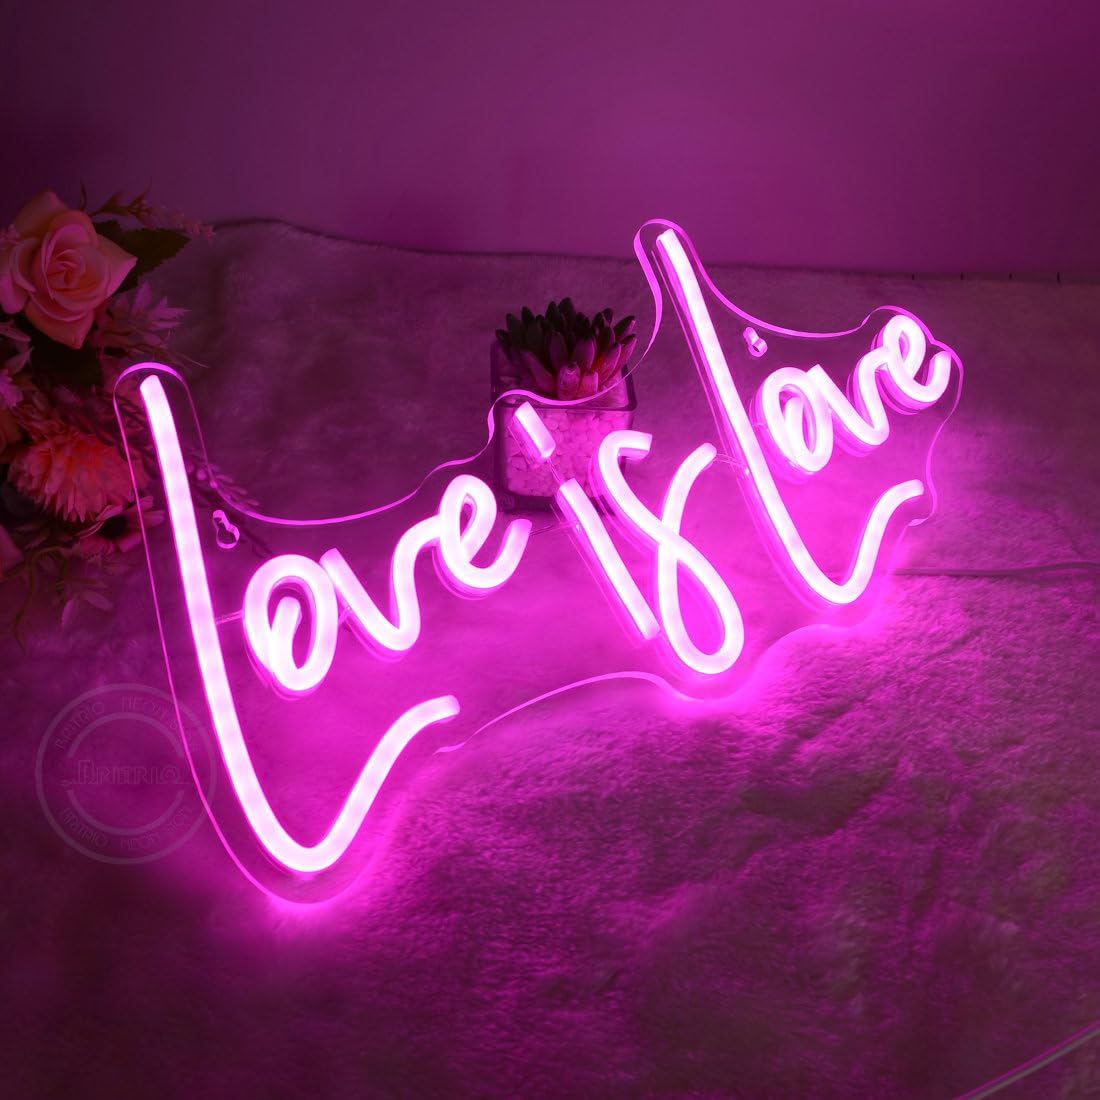 Love is Love Neon Light Sign Gay Pride LED Sign